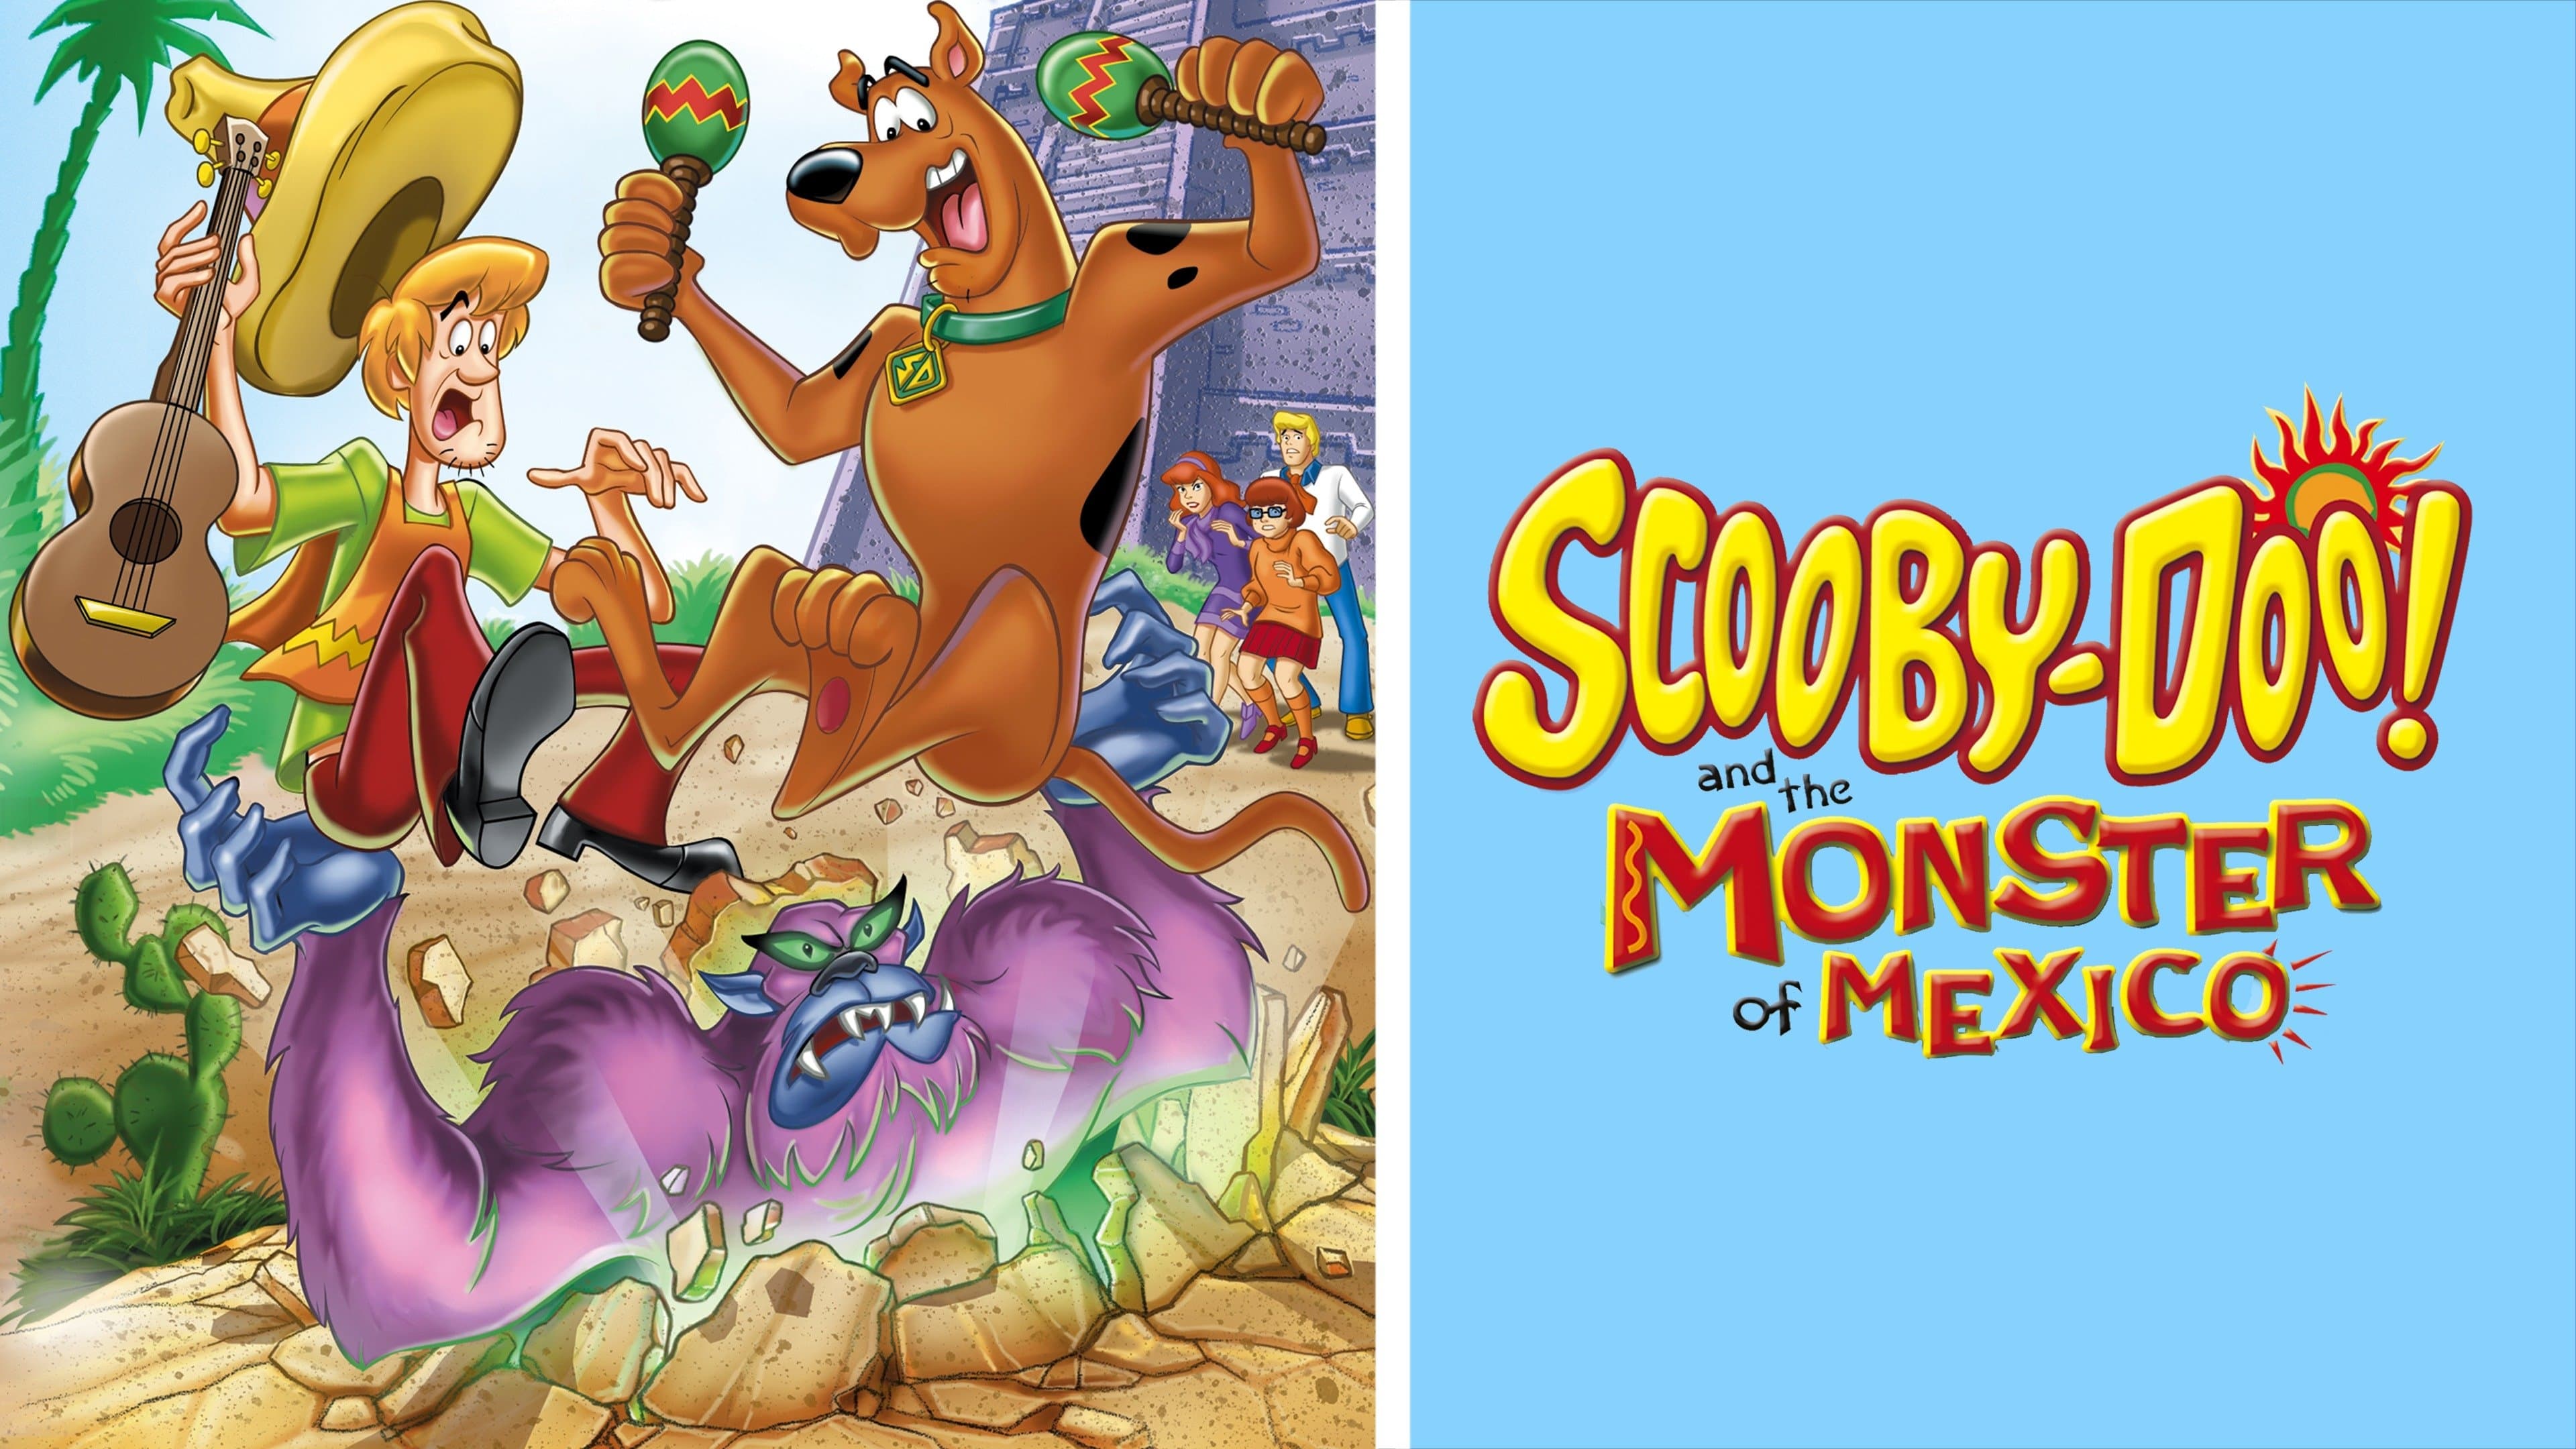 Scooby-Doo! and the Monster of Mexico (2003)